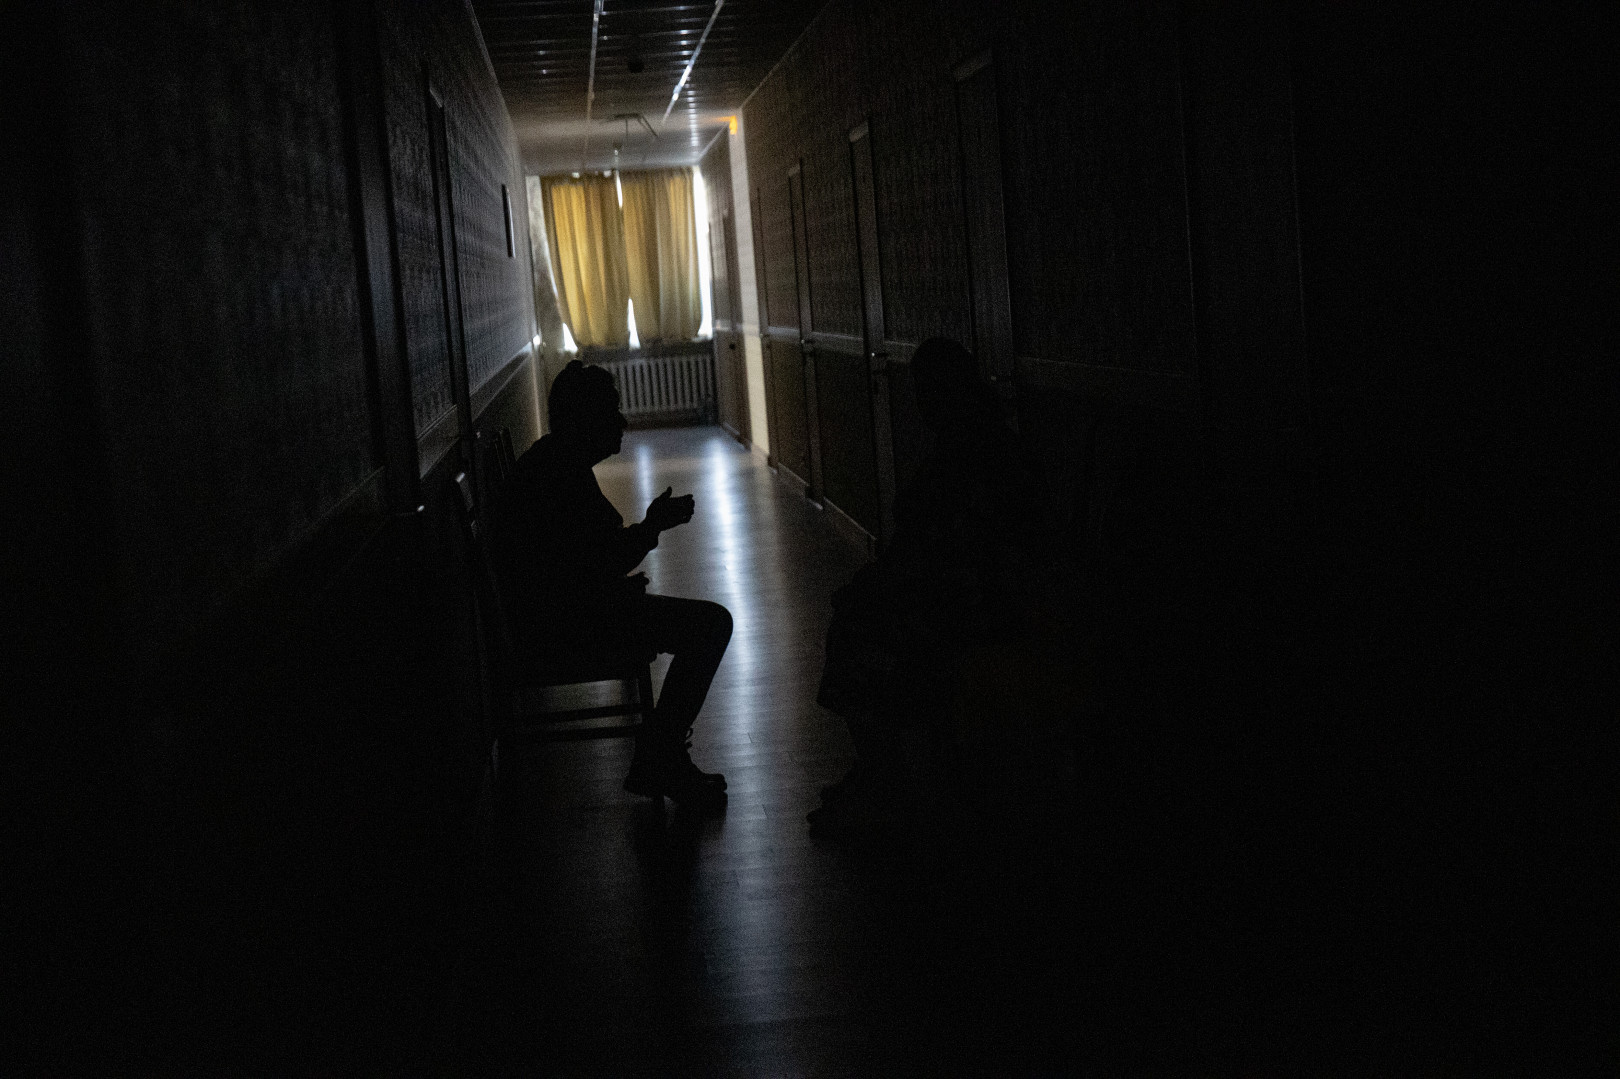 At a hotel in Mykolayiv, when the air raid sirens sound, the residents move to the hallway which is thought to be safer – Photo: Huszti István / Telex